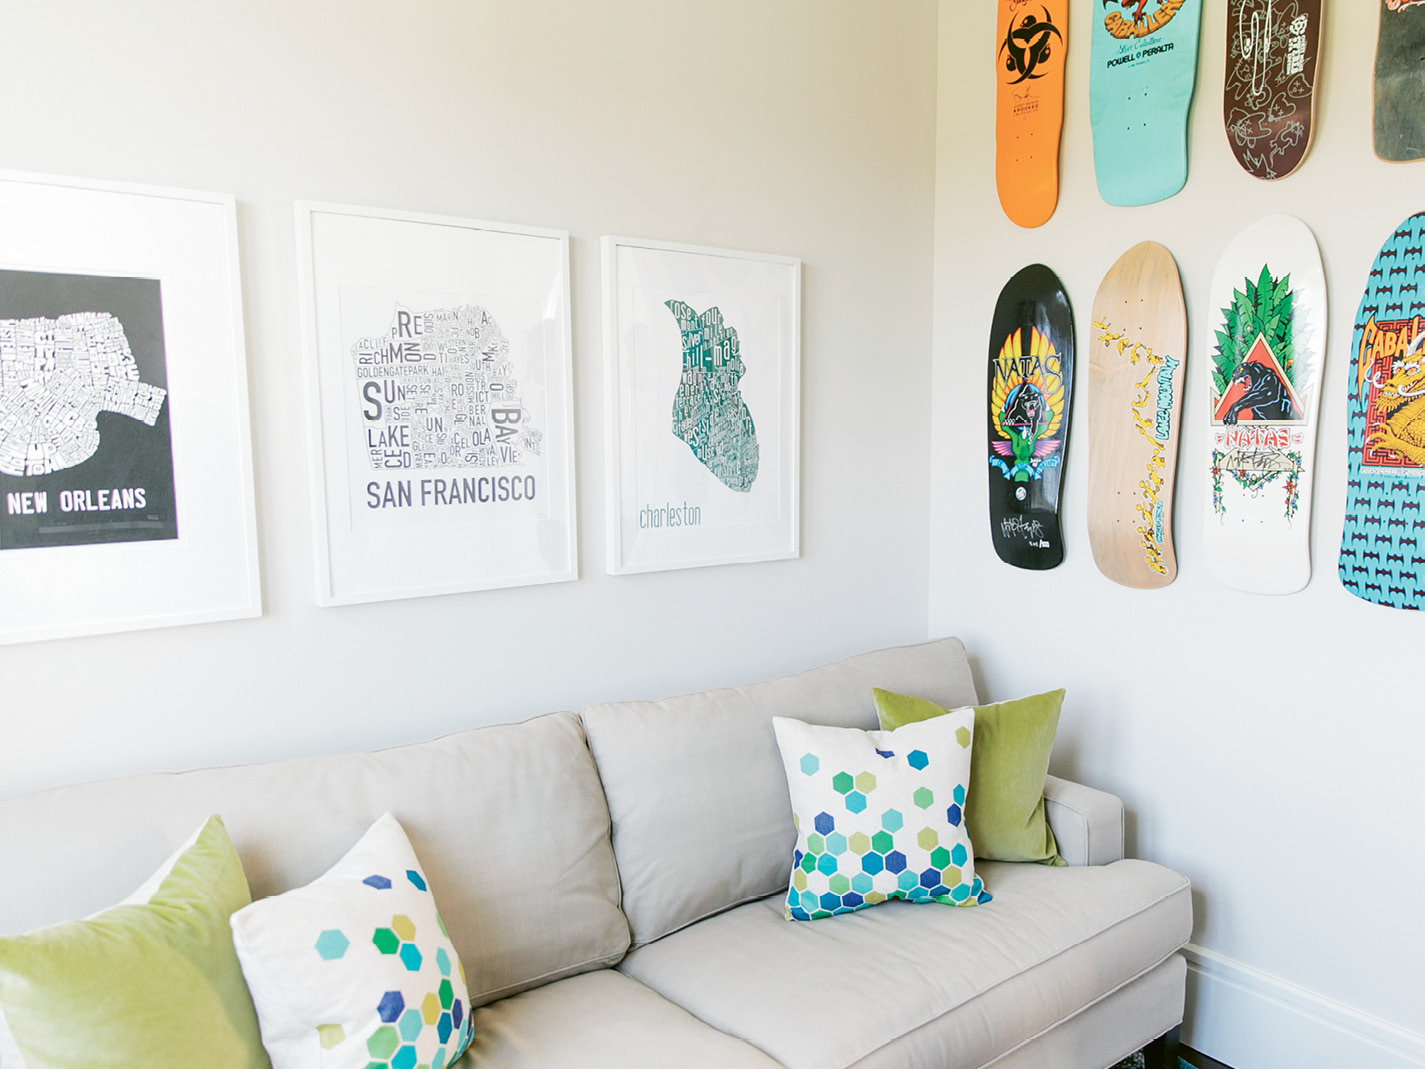 When the twins are craving quiet time, they retreat to their second-floor bedrooms and shared TV room, where the walls are decorated with skateboards that once belonged to Melissa’s brother. “Amelia skateboards, and Cole’s the intellectual of the family,” Melissa notes.